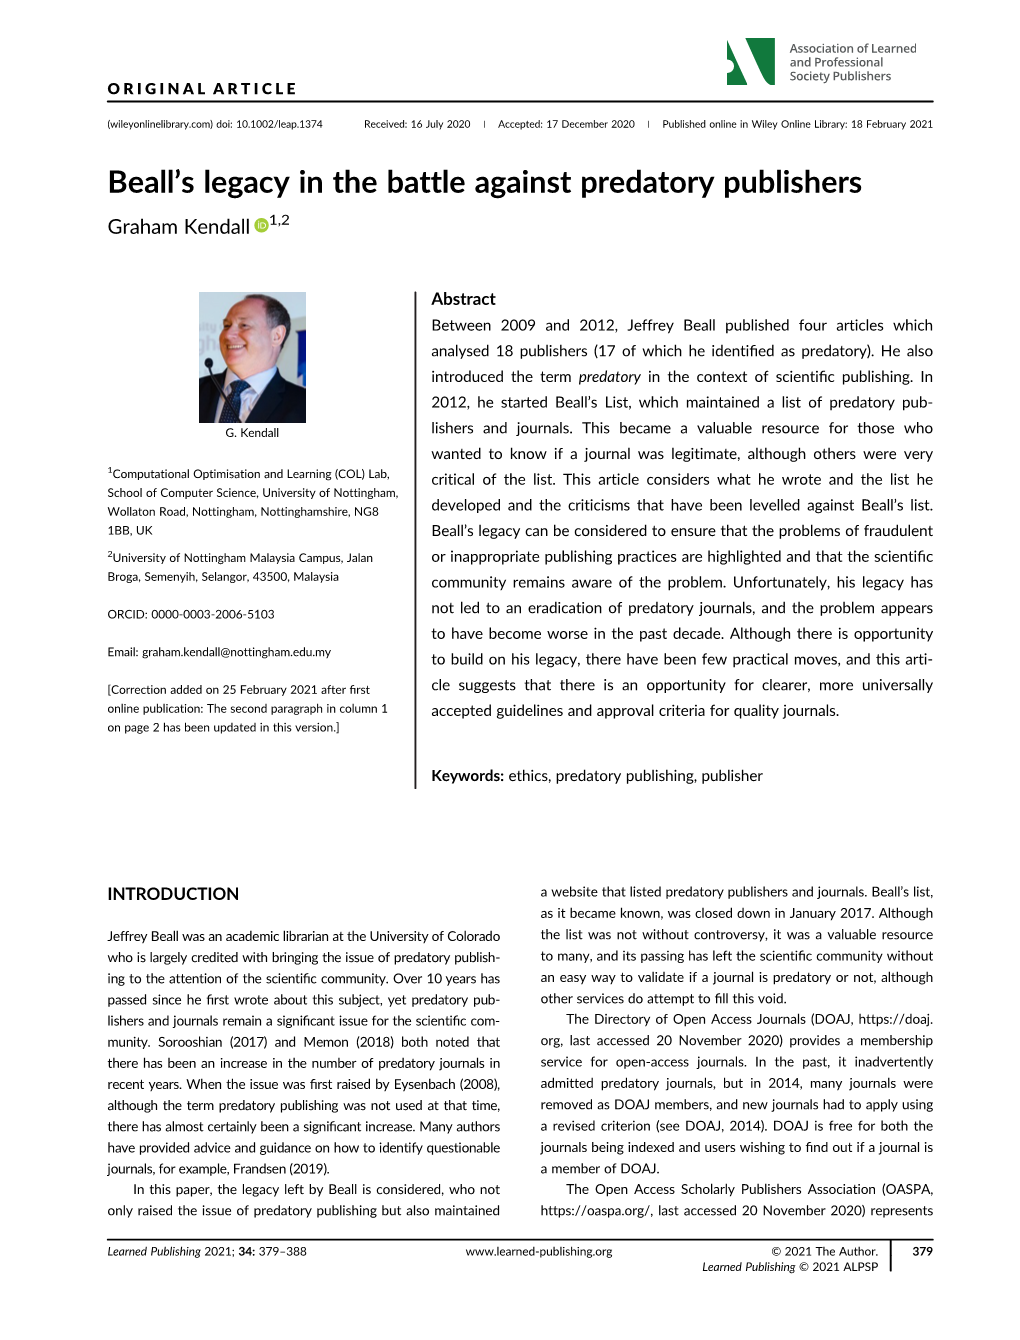 Beall's Legacy in the Battle Against Predatory Publishers